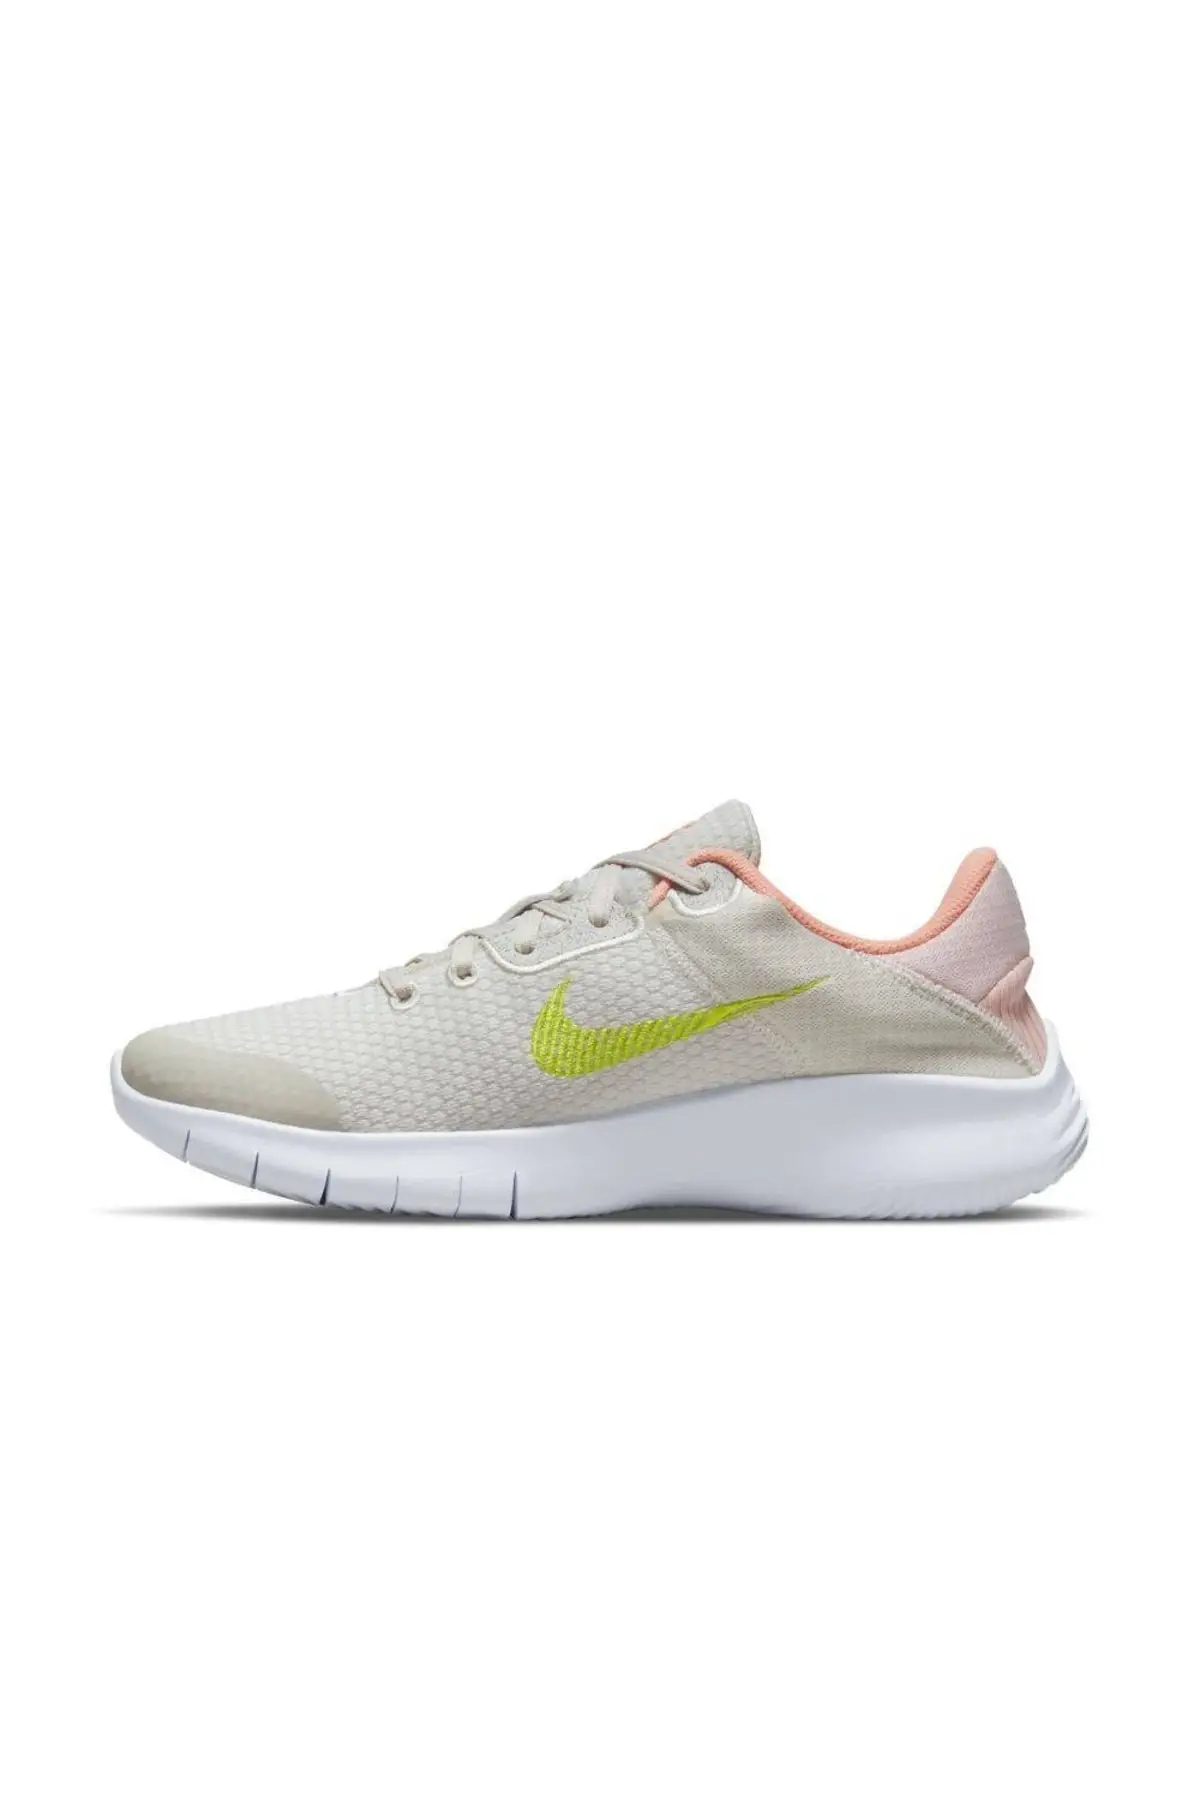 Unleash Your Potential with Women’s Nike Flex Shoes插图2